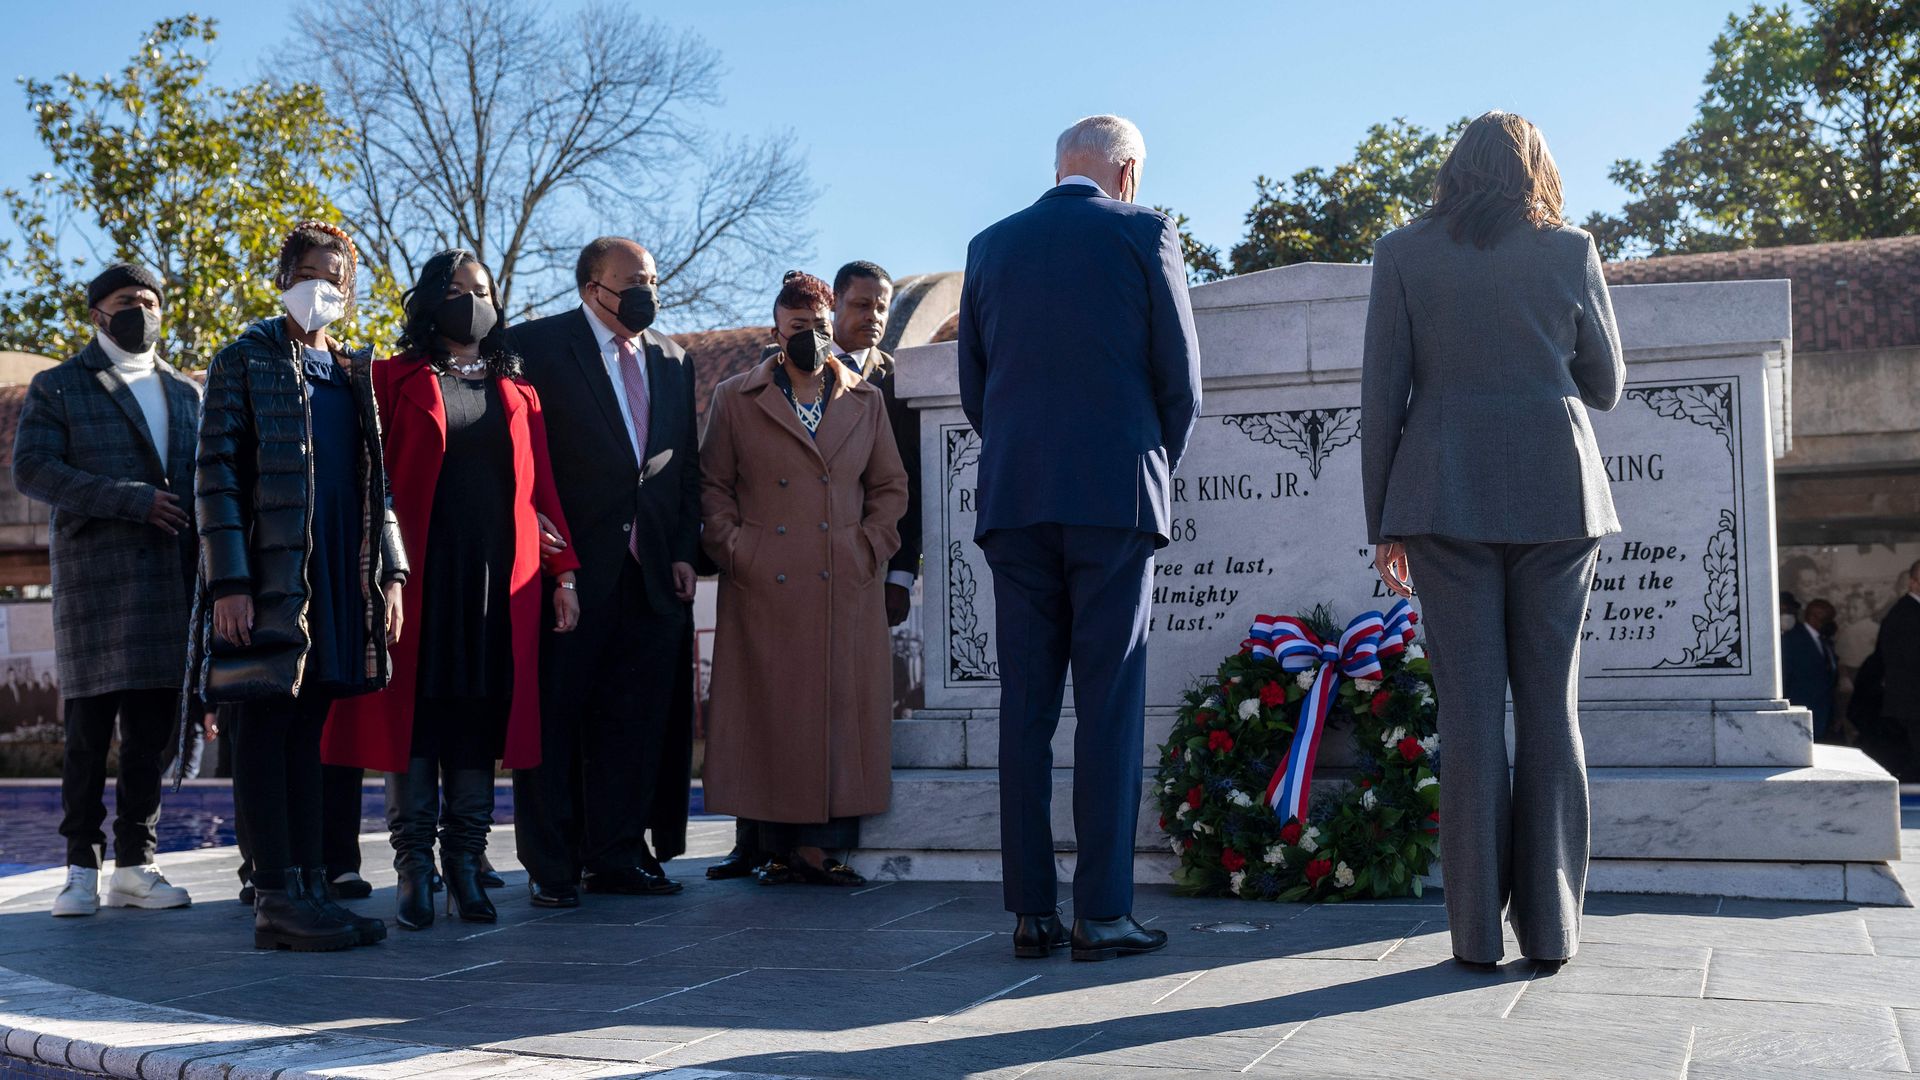 Family members are seen looking on as President Biden and Vice President Kamala Harris pay their respects at the tomb for Martin Luther King Jr. and Coretta Scott King.